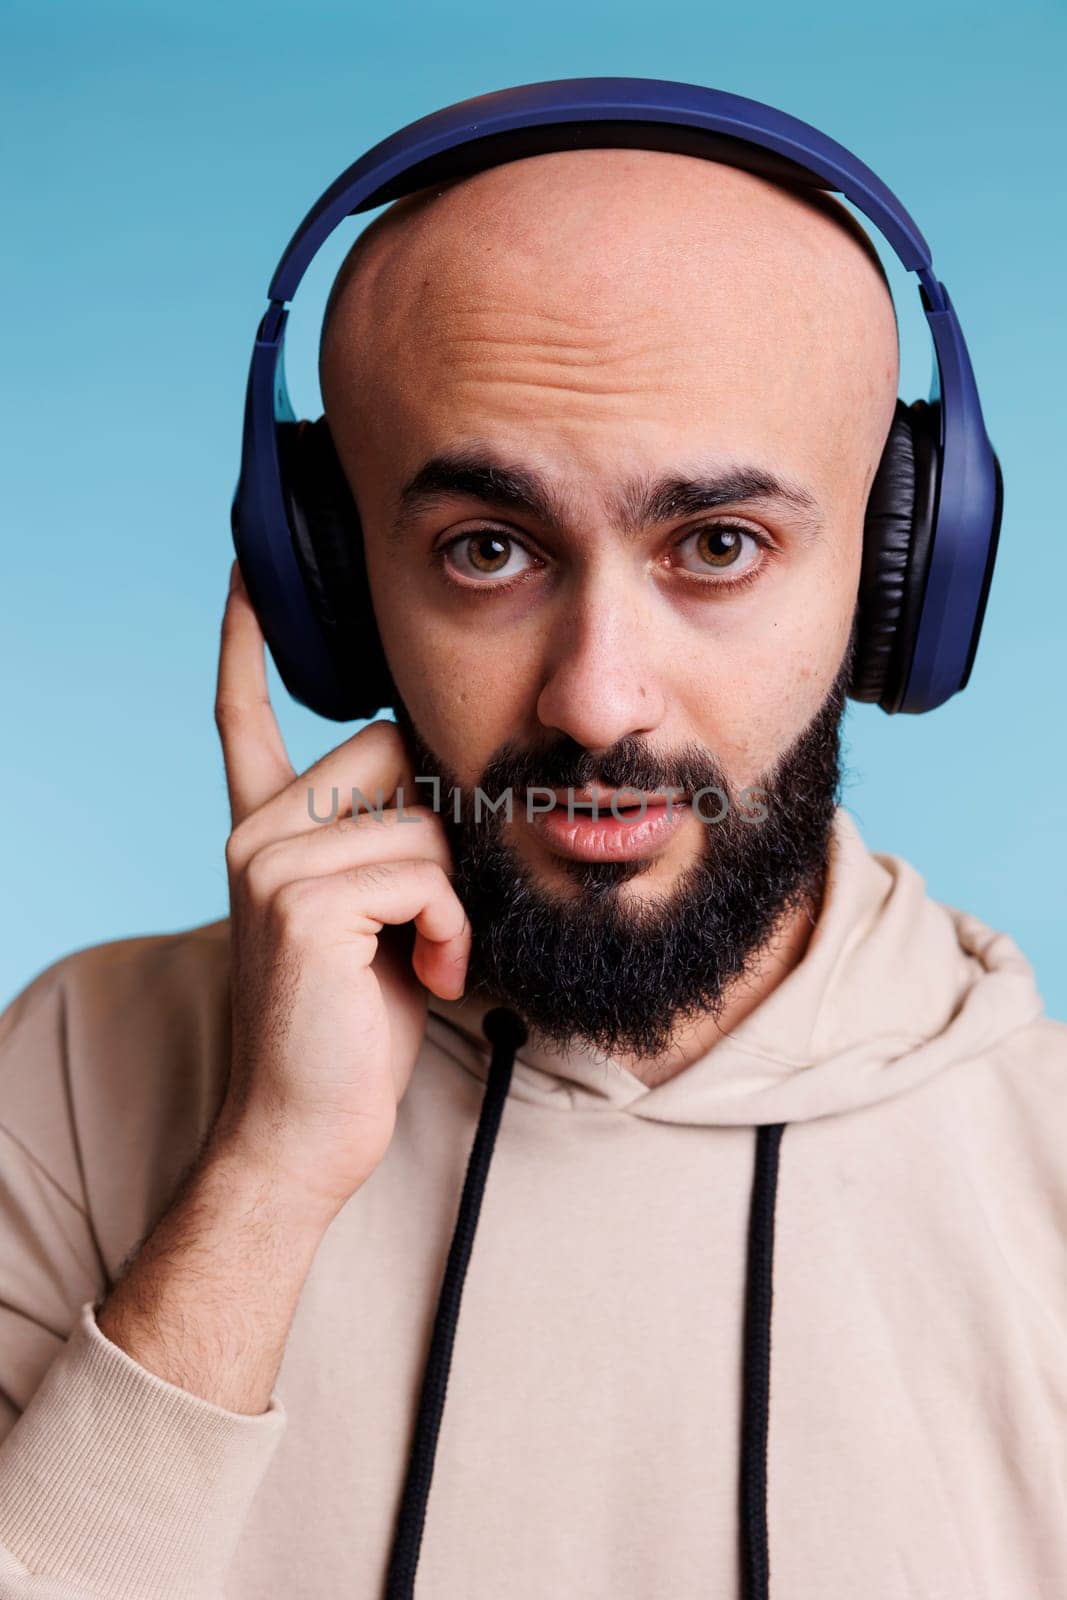 Young arab man listening to music in wireless headphones portrait. Bald bearded person enjoying tunes playlist in earphones while looking at camera with neutral expression